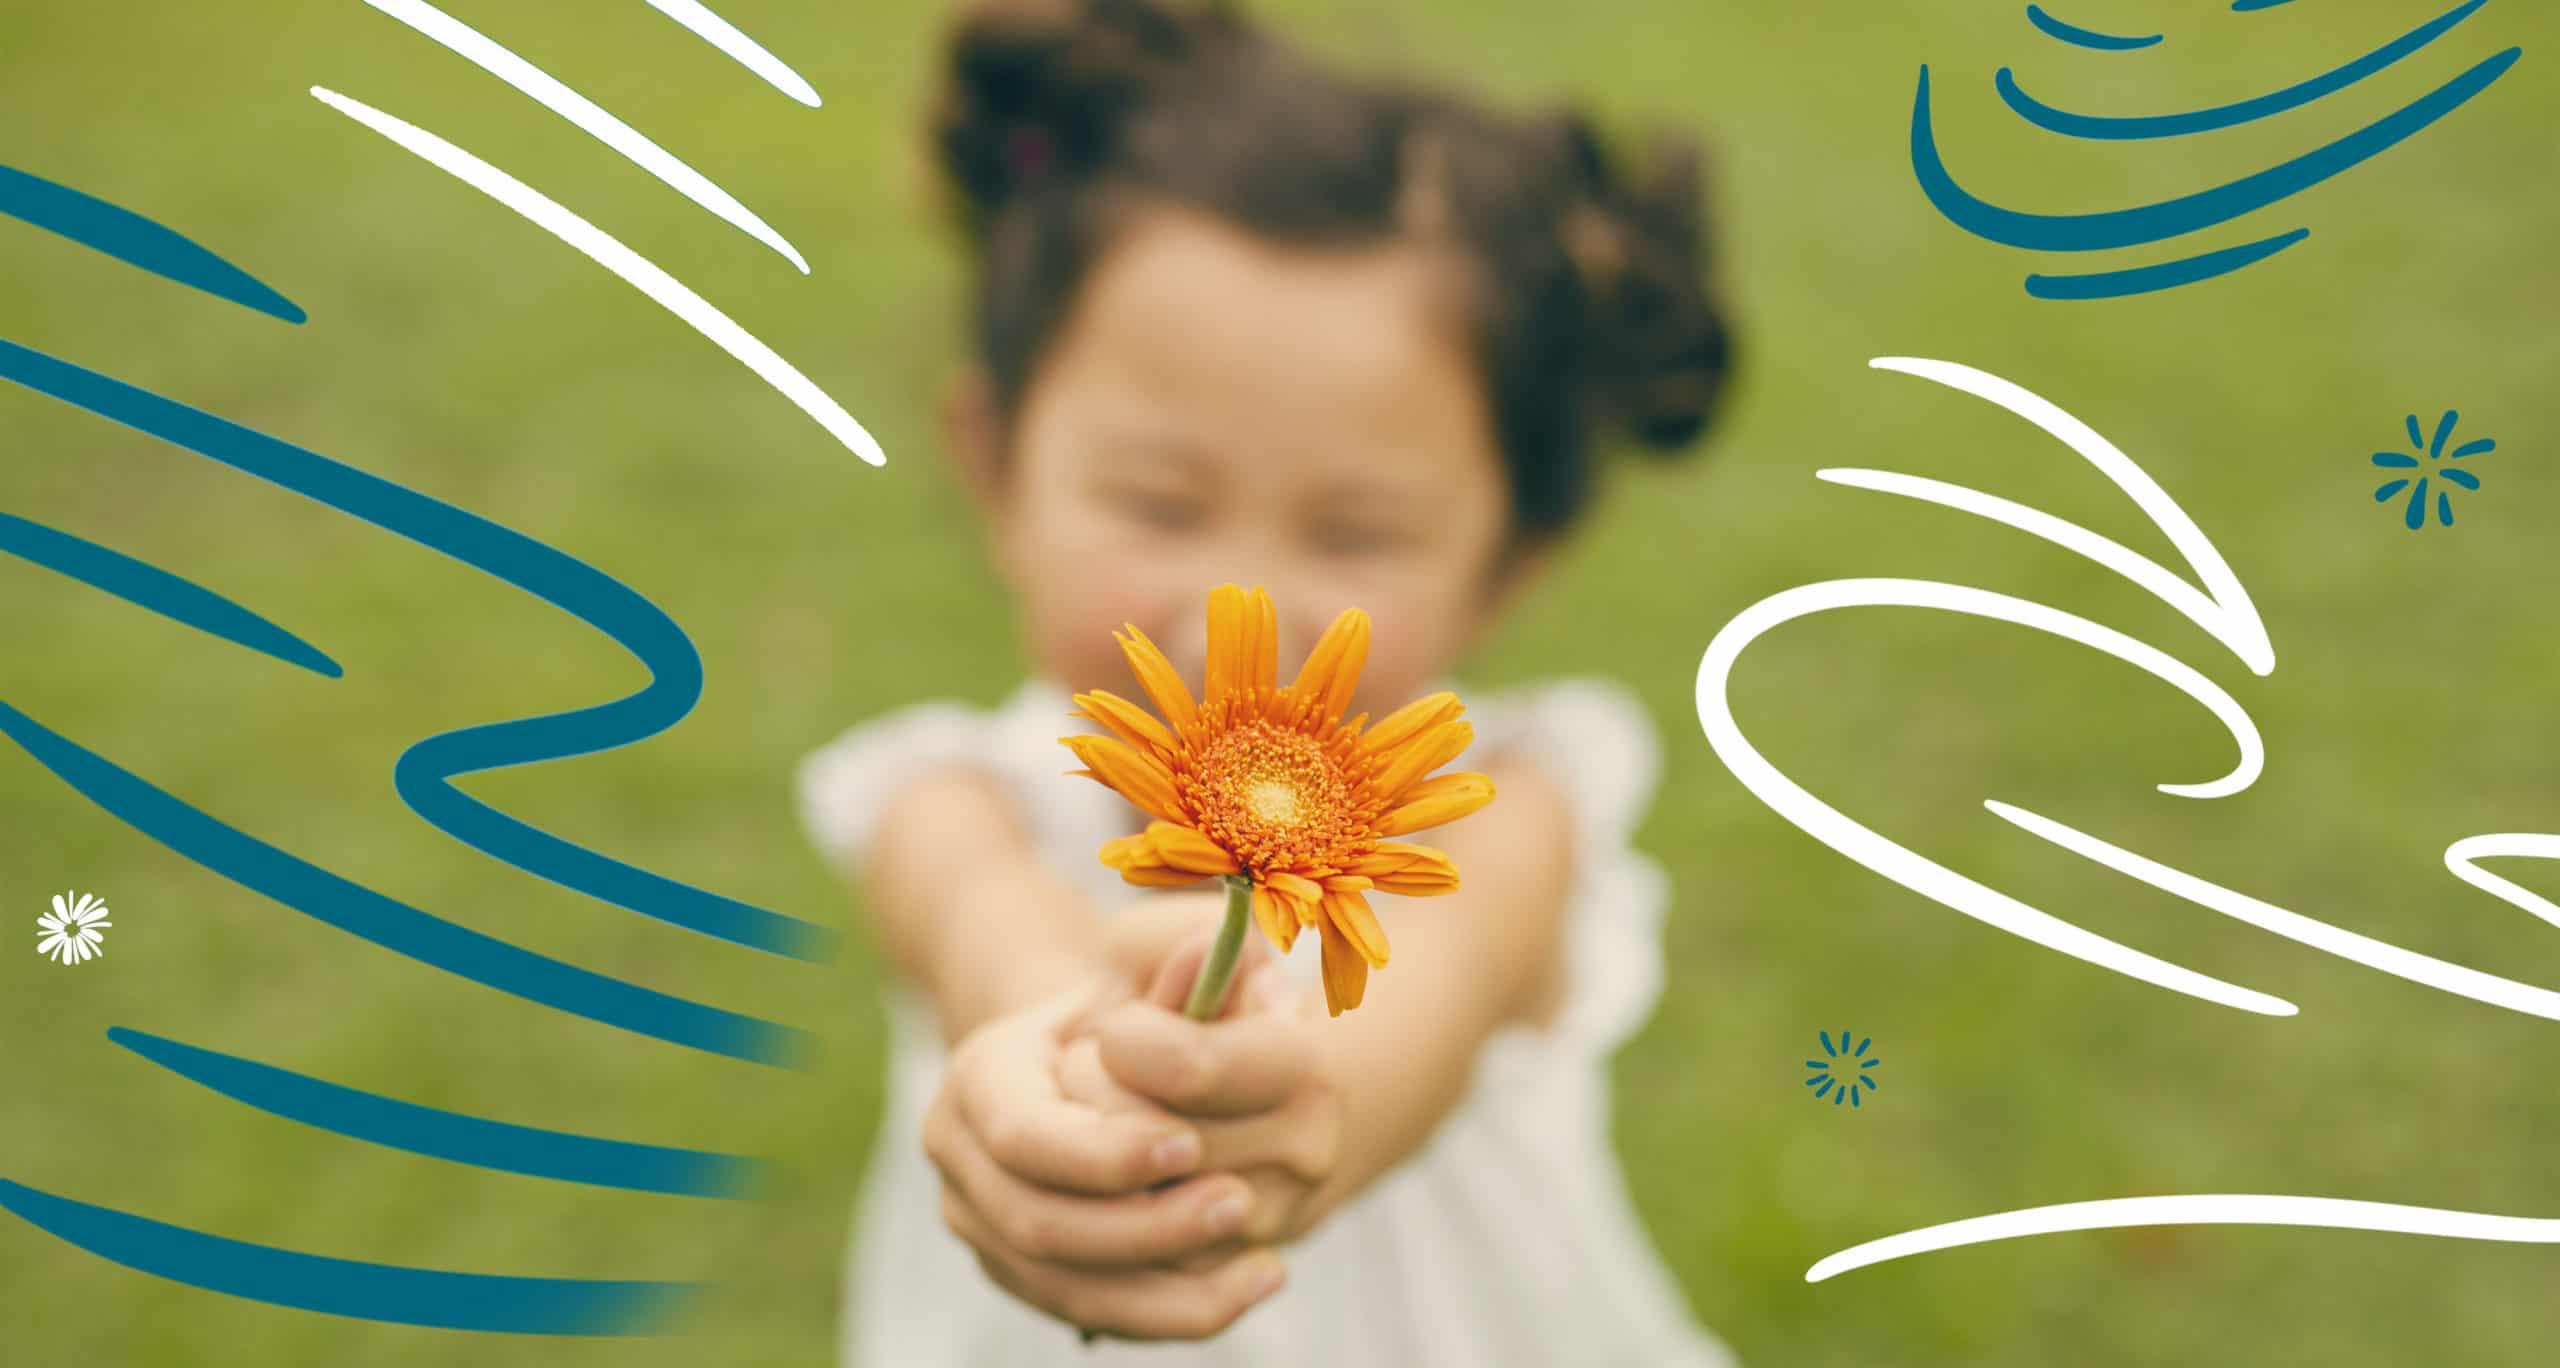 Stylized image of young Asian girl holding a flower up to the camera